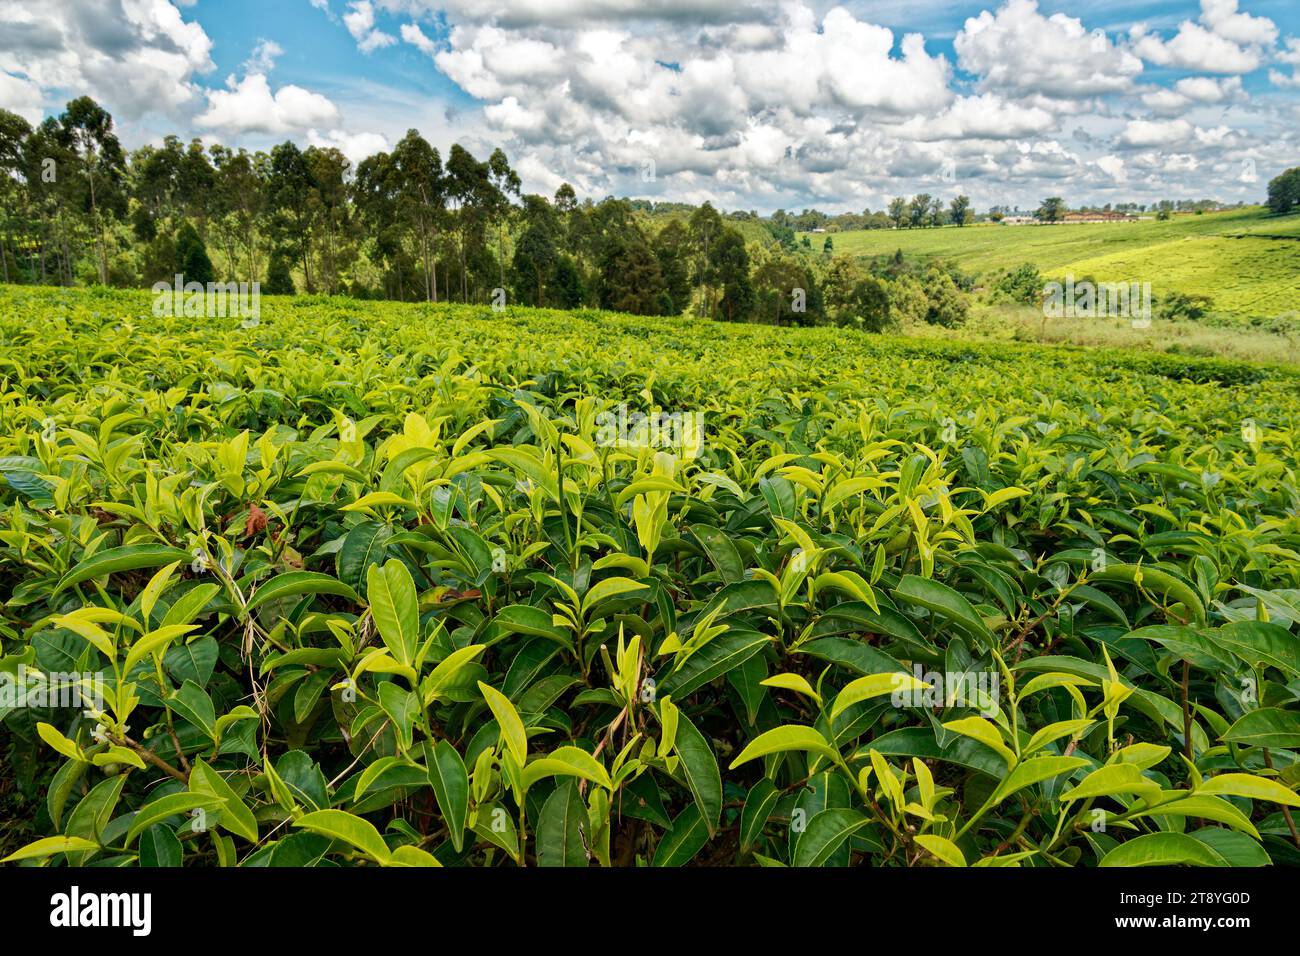 Landscape of Tea plantation in Uganda Africa, green fields with tea plant, detail of tea plant, blue sky with clouds, important export product. Stock Photo